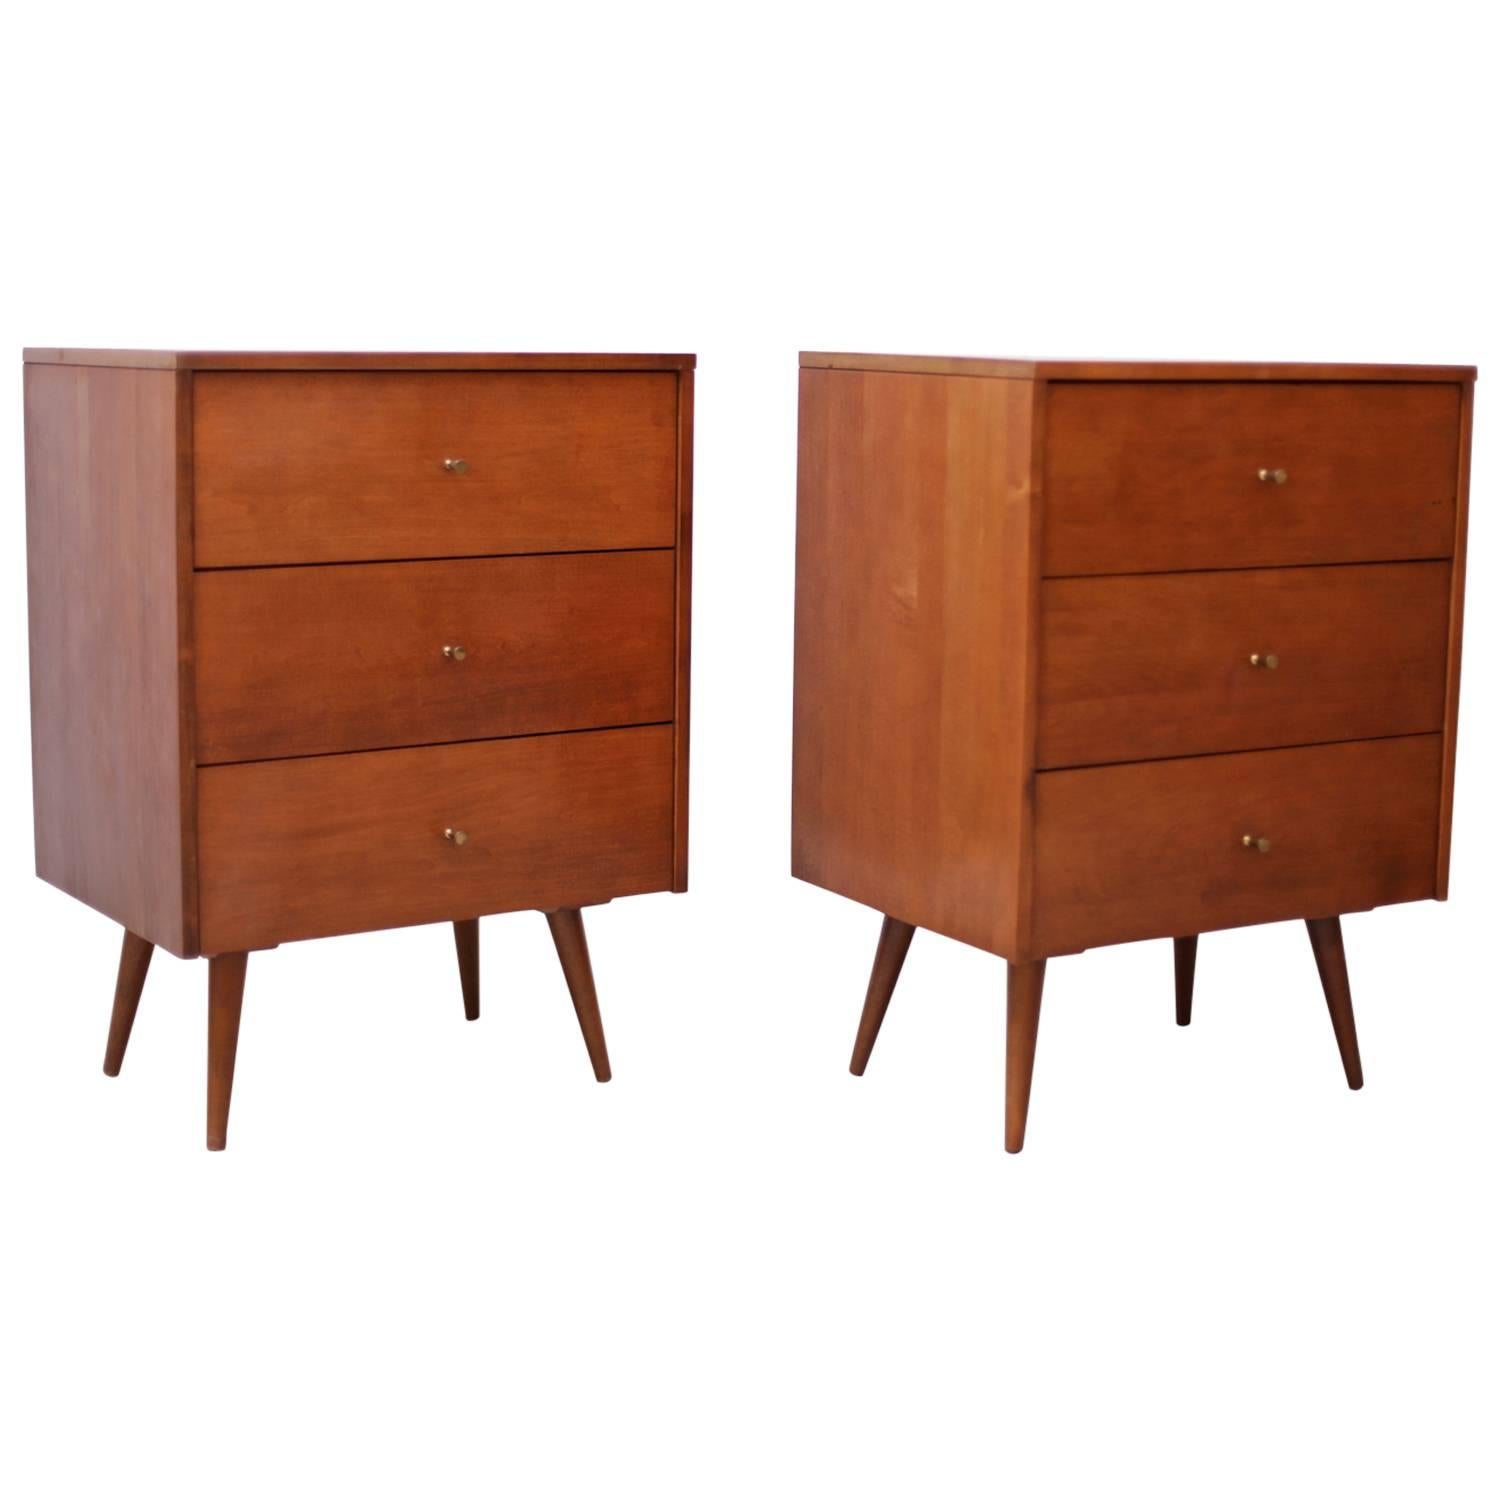 Set of Two Chest of Drawers by Paul McCobb in Dark Maple